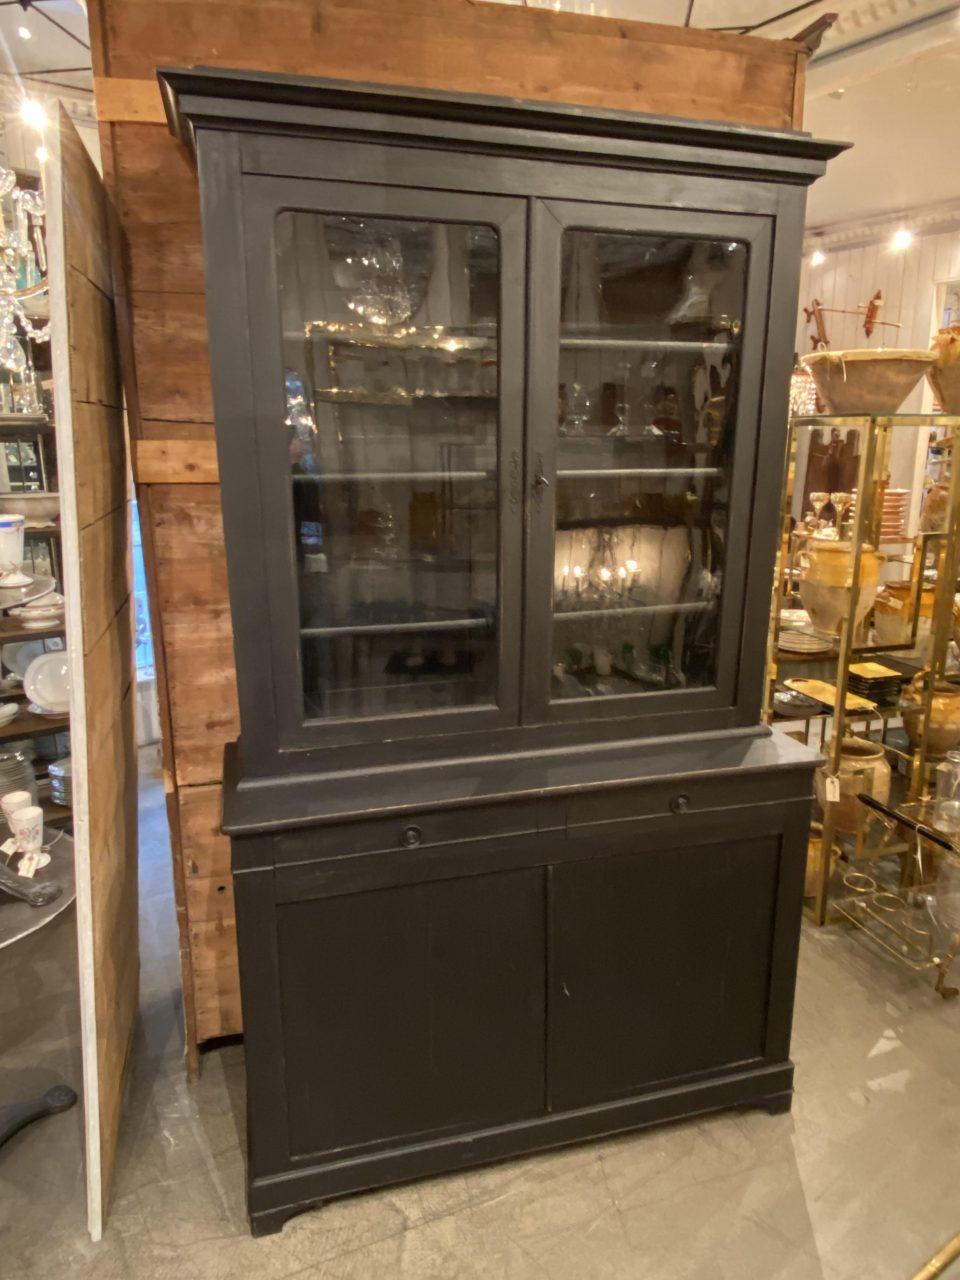 Elegant and beautiful old French 2-part display cabinet, and an ideal decor piece for porcelain and glass storage.

The cabinet consists of an upper display case with double original glass doors, and adjustable shelves. The lower section holds a